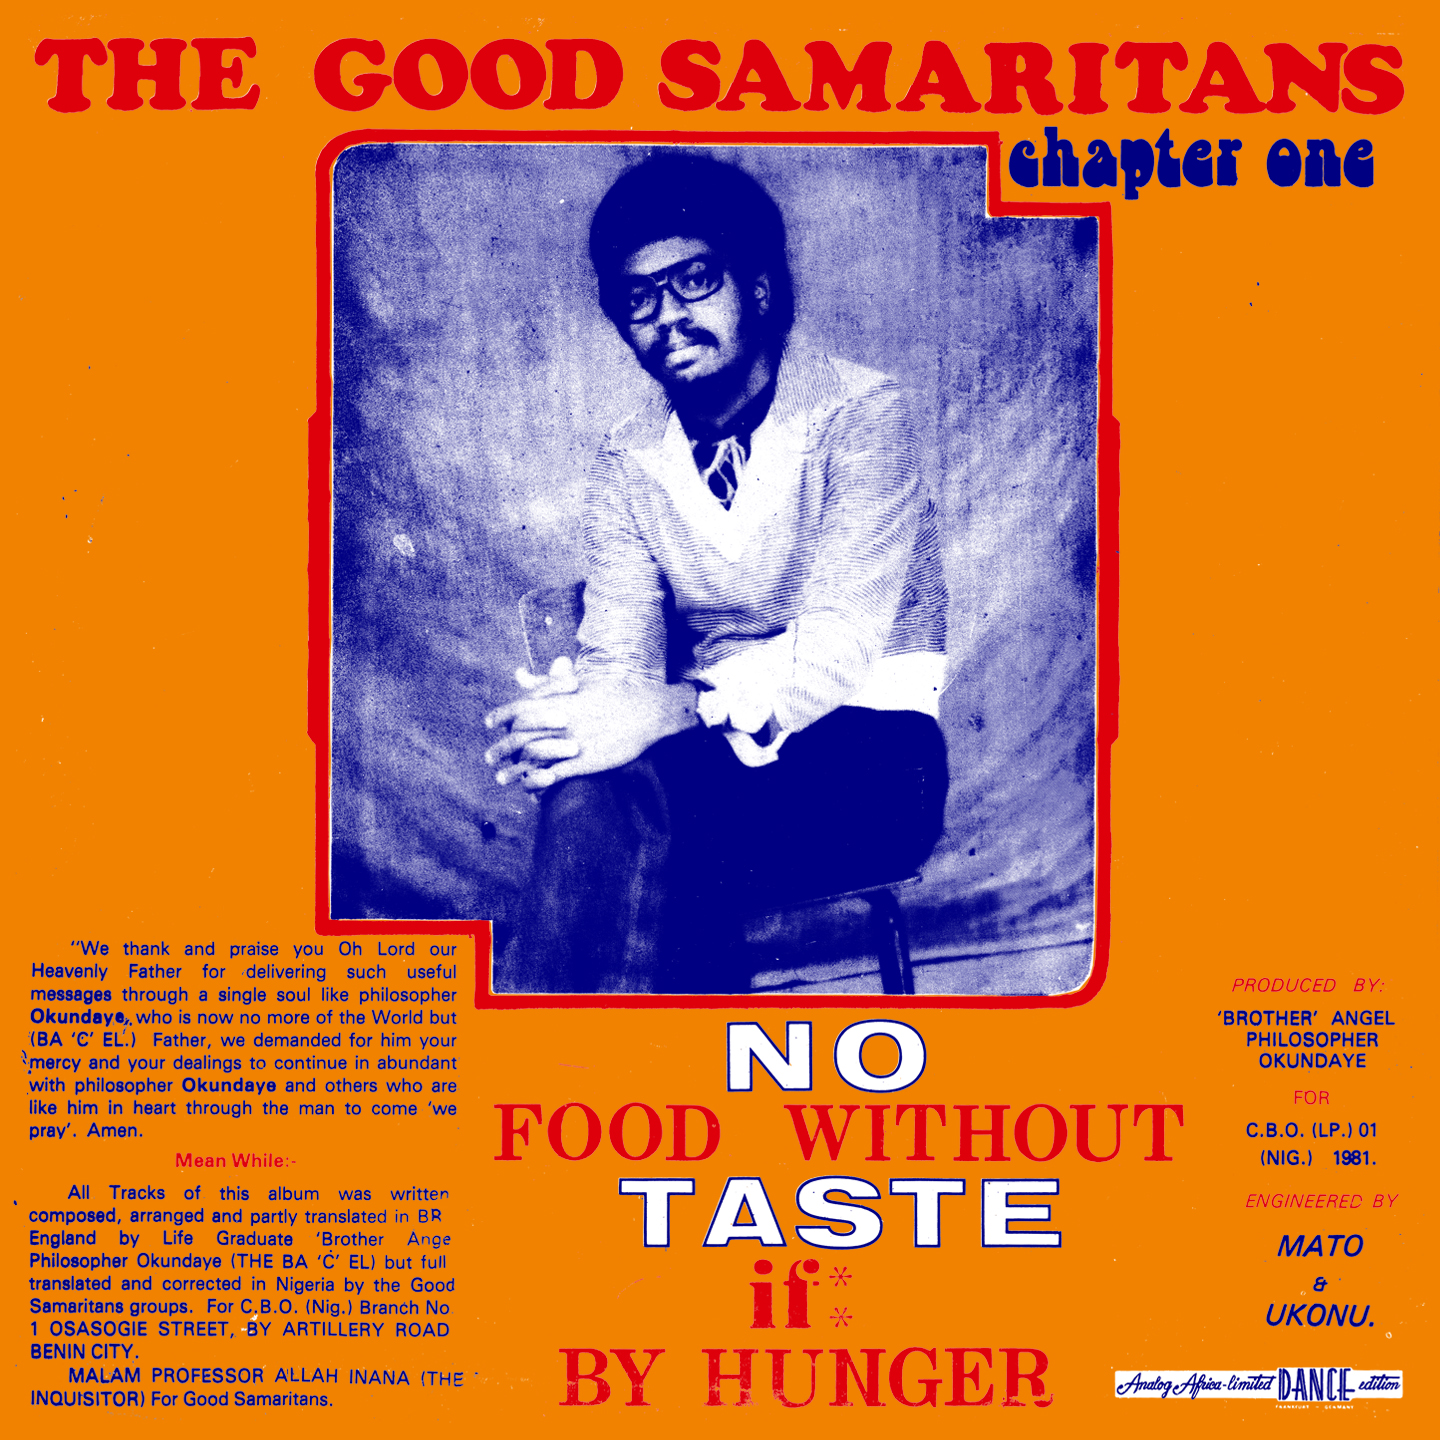 THE GOOD SAMARITANS " NO FOOD WITHOUT TASTE IF BY HUNGER" VINYLE